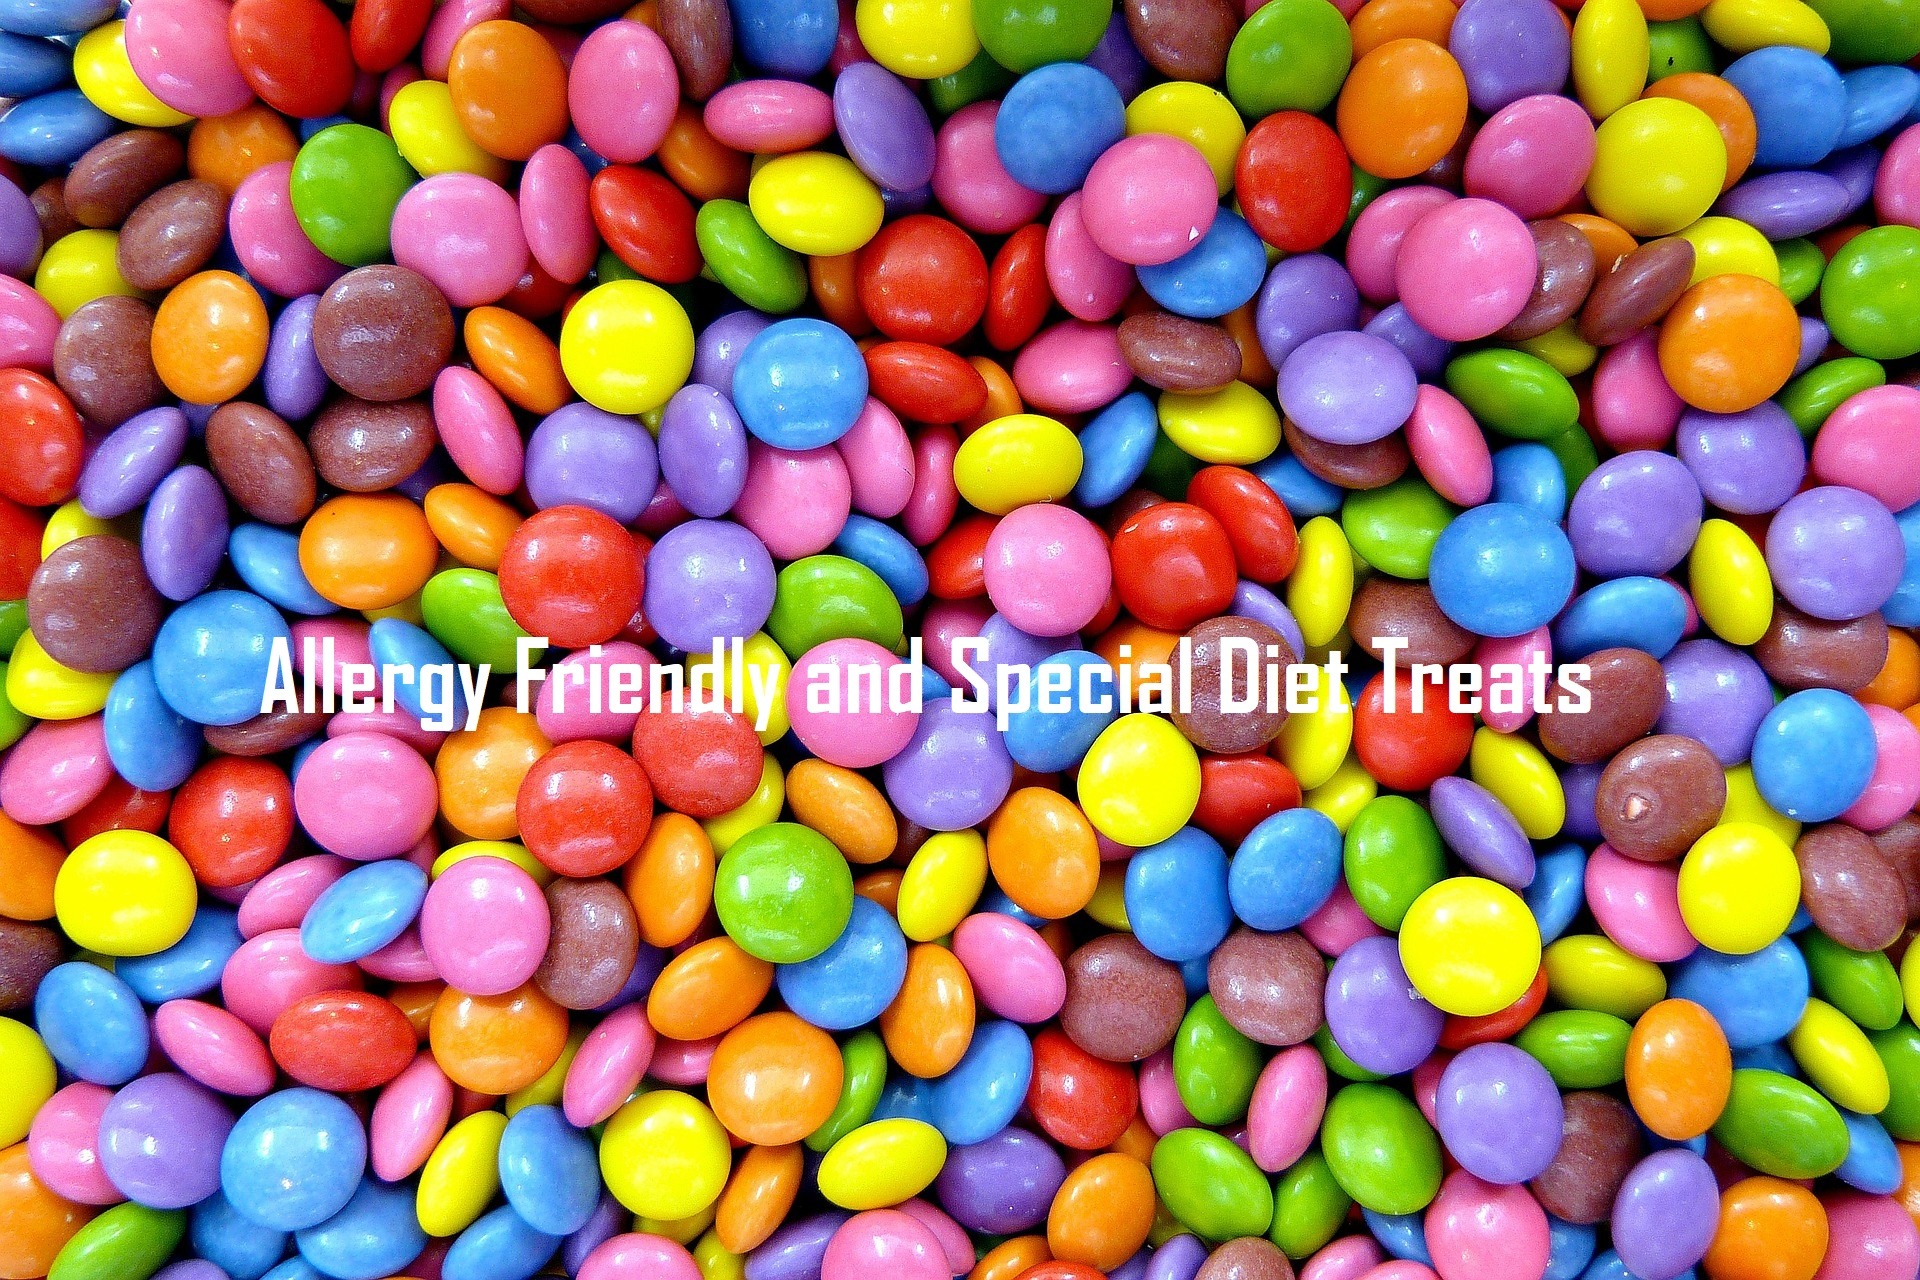 Allergy Friendly Candy and Special Diet Treats for All to Enjoy